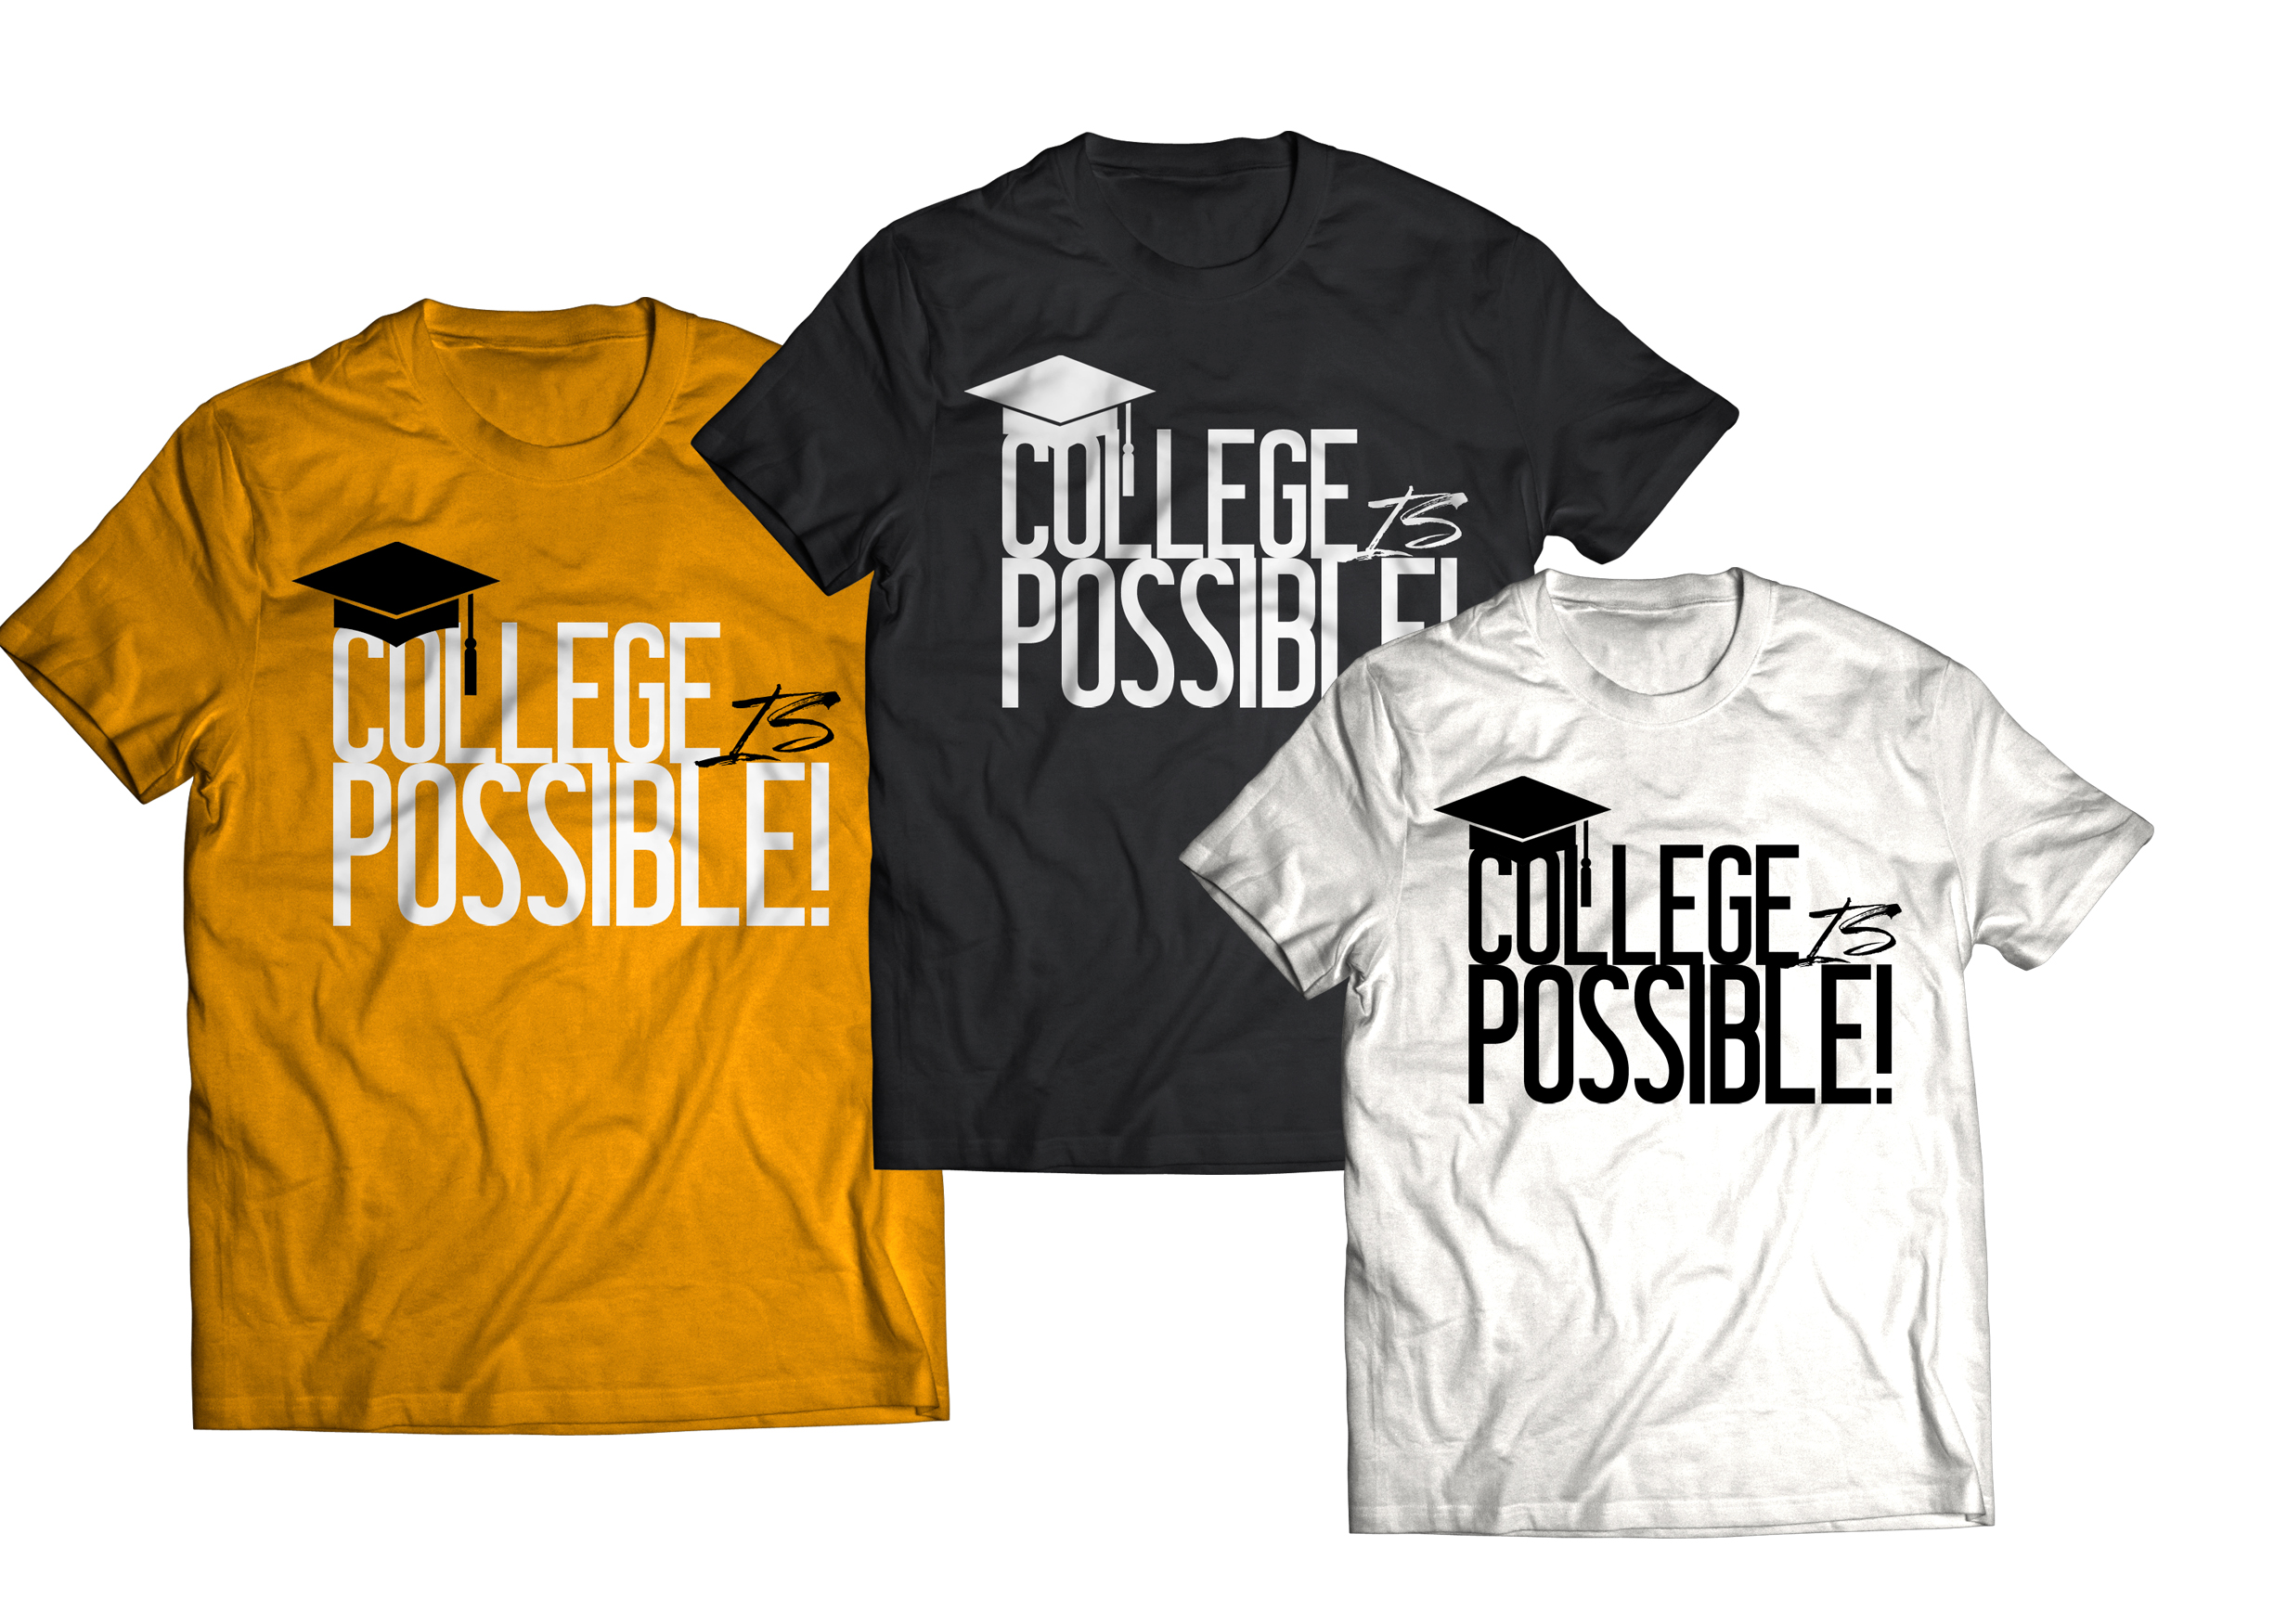 college is possible shirt.jpg